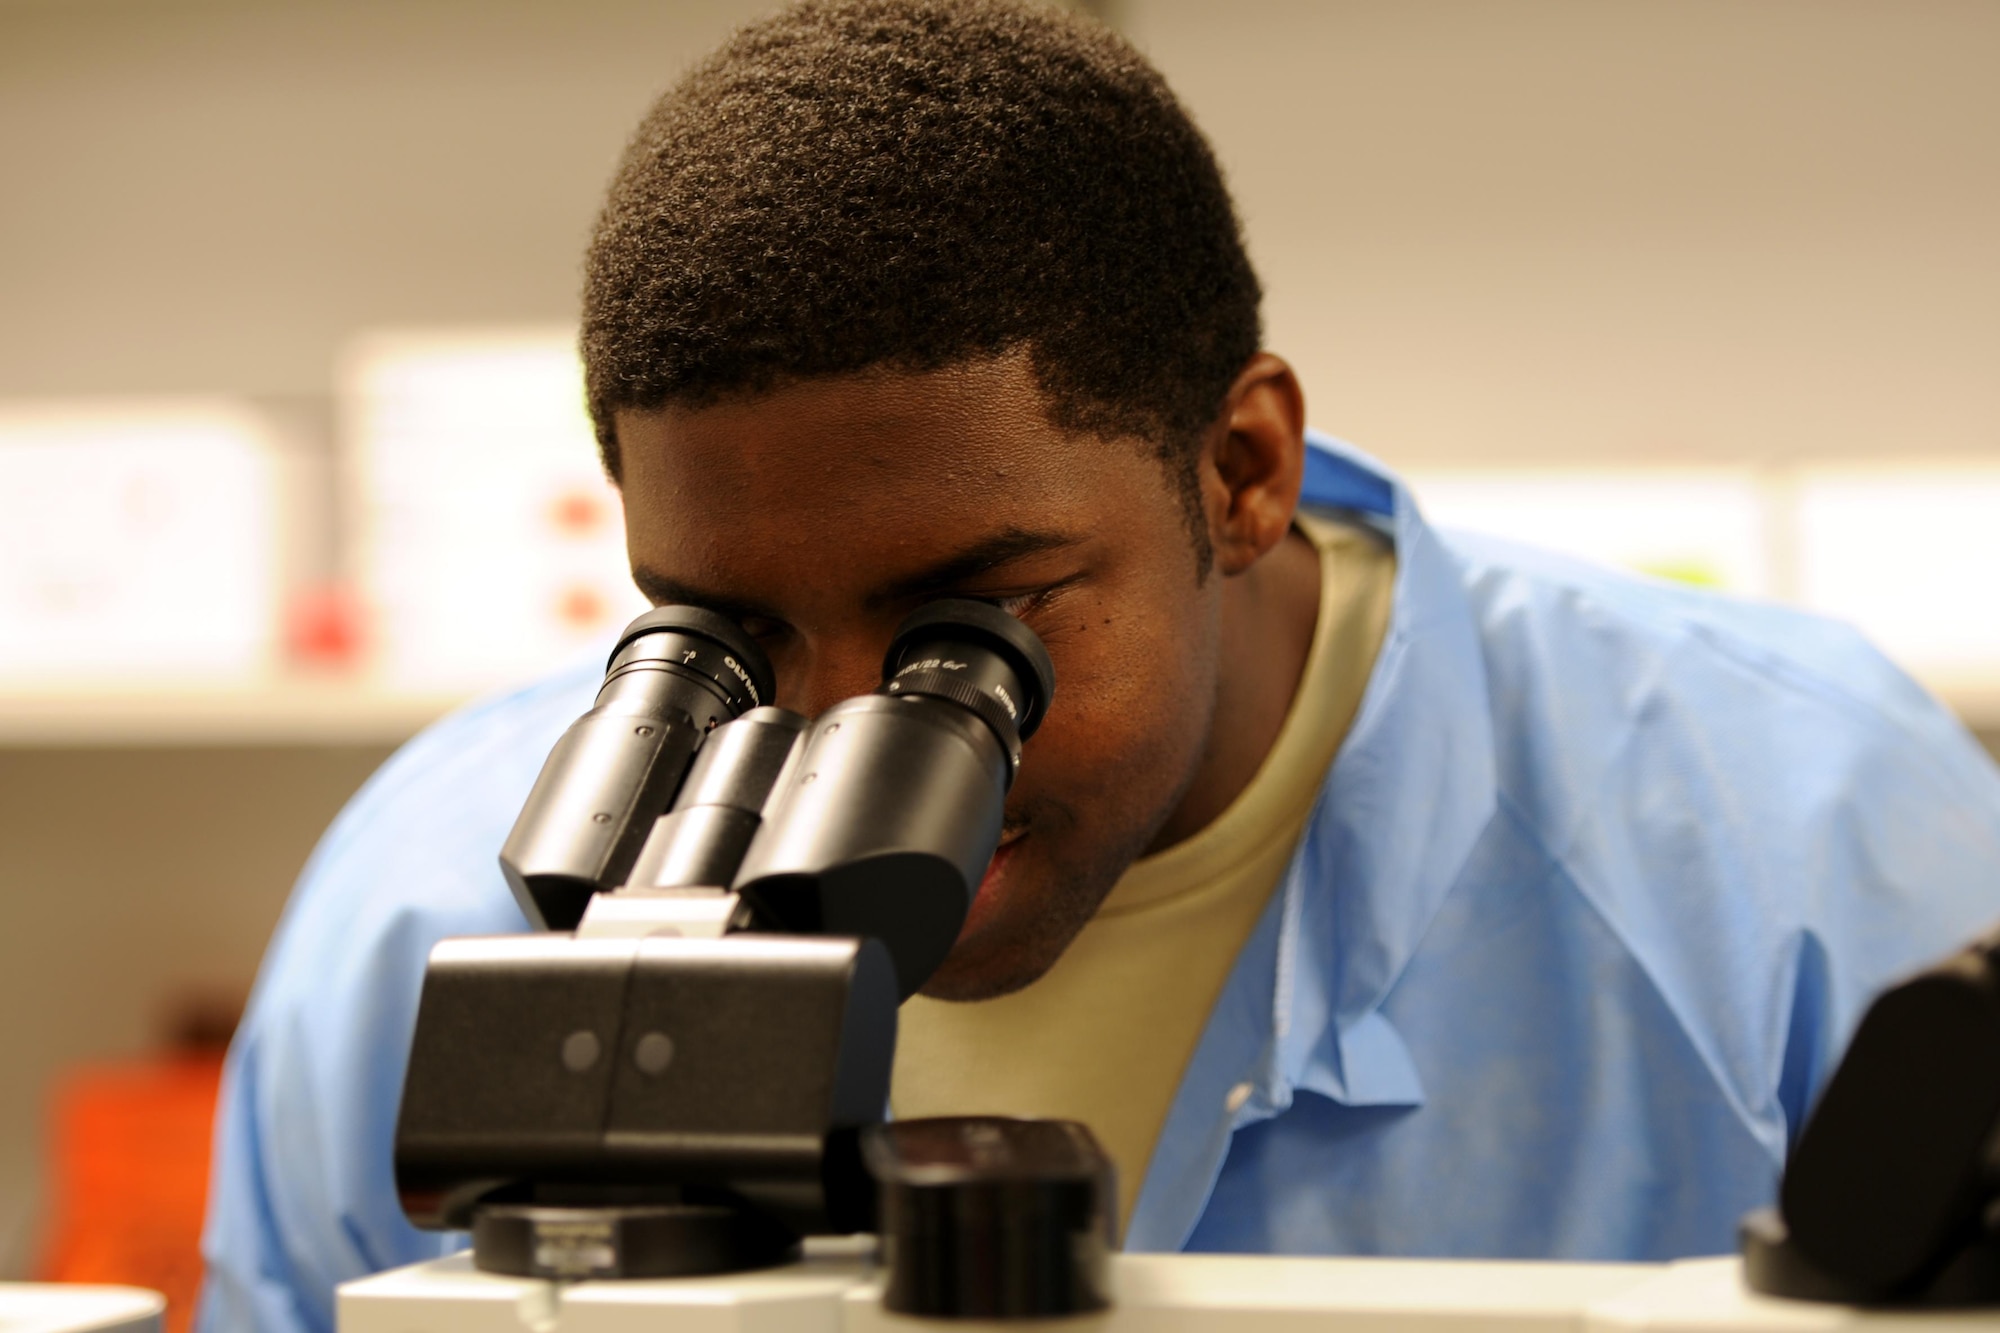 Senior Airman Roger Smith, 1st Special Operations Medical Support Squadron laboratory technician, looks at a specimen through a microscope on Hurlburt Field, Fla., April 8, 2015.  The 1st SOMDSS Laboratory is comprised of seven personnel who are responsible for more than 17,000 beneficiaries and 156,000 tests a year. (U.S. Air Force photo/Staff Sgt. Katherine Holt)